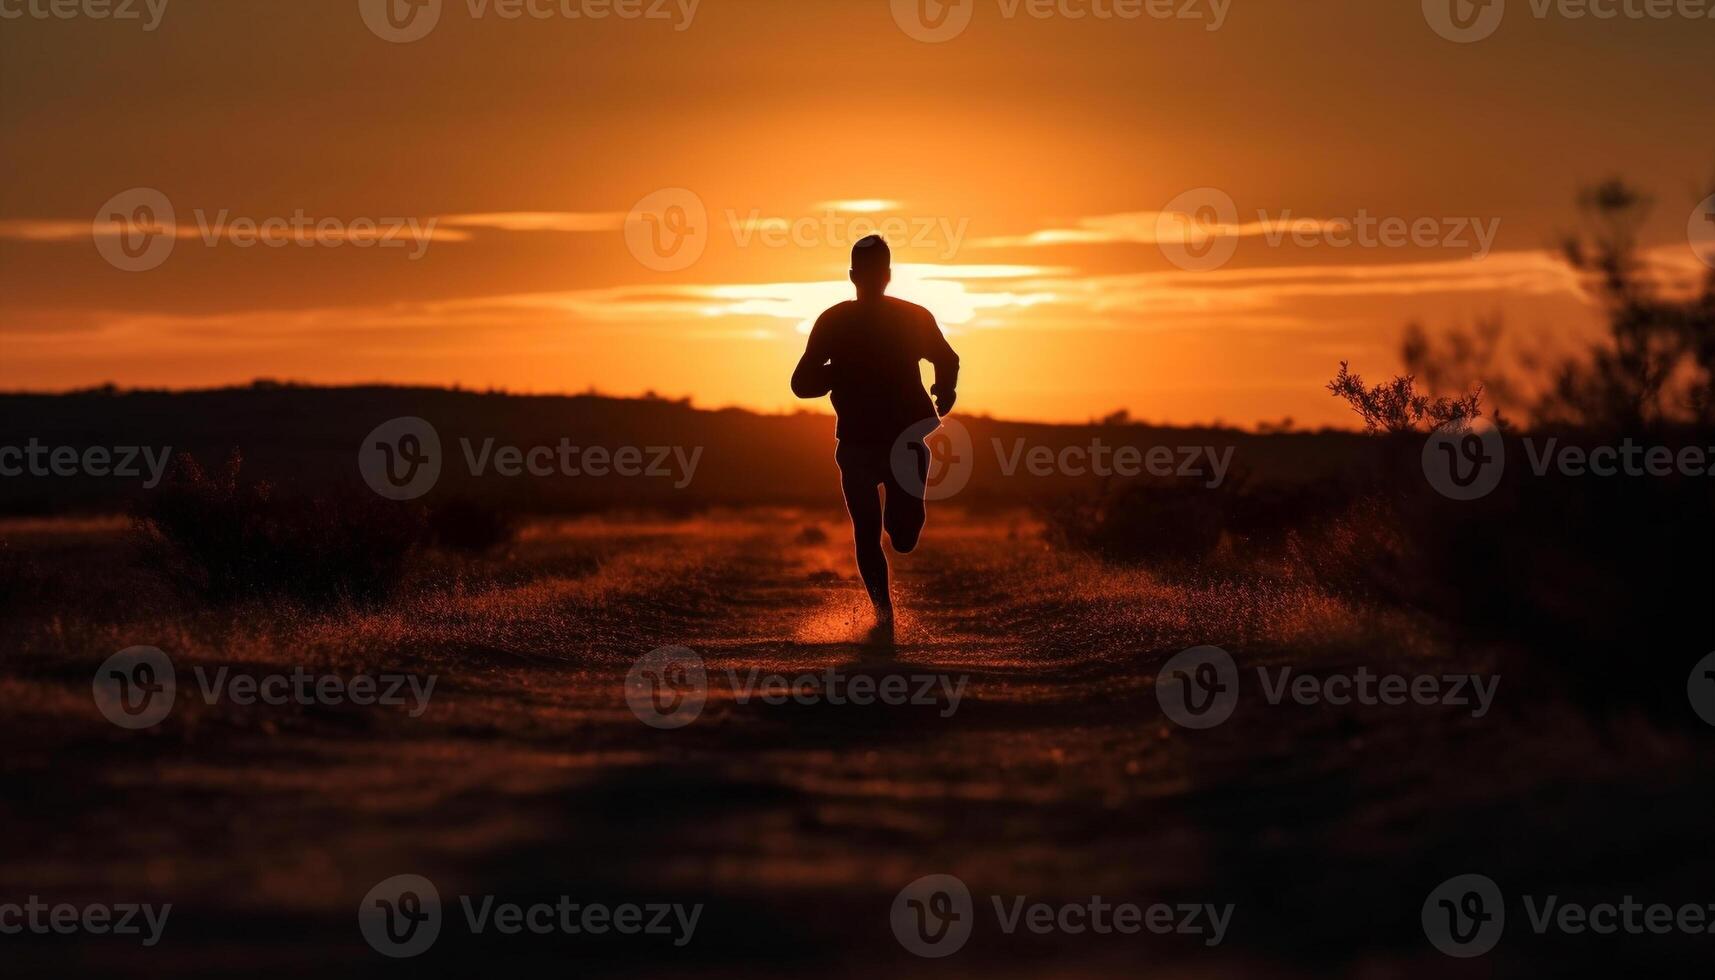 One person jogging at dusk, silhouette against a sunset sky generated by AI photo